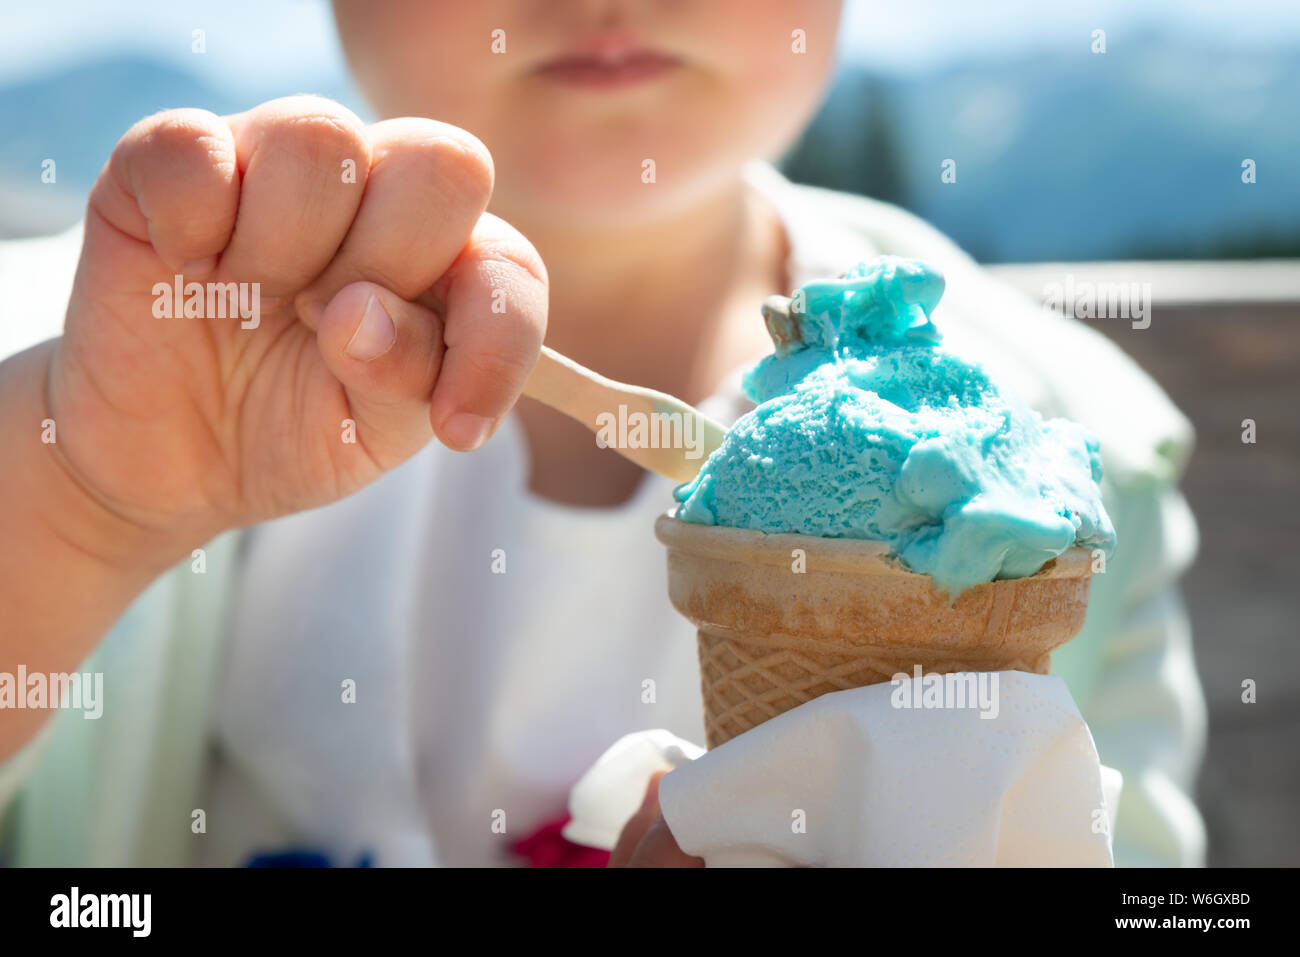 Little Girl Eating Ice Cream In Summer On A Hot Day Stock Photo